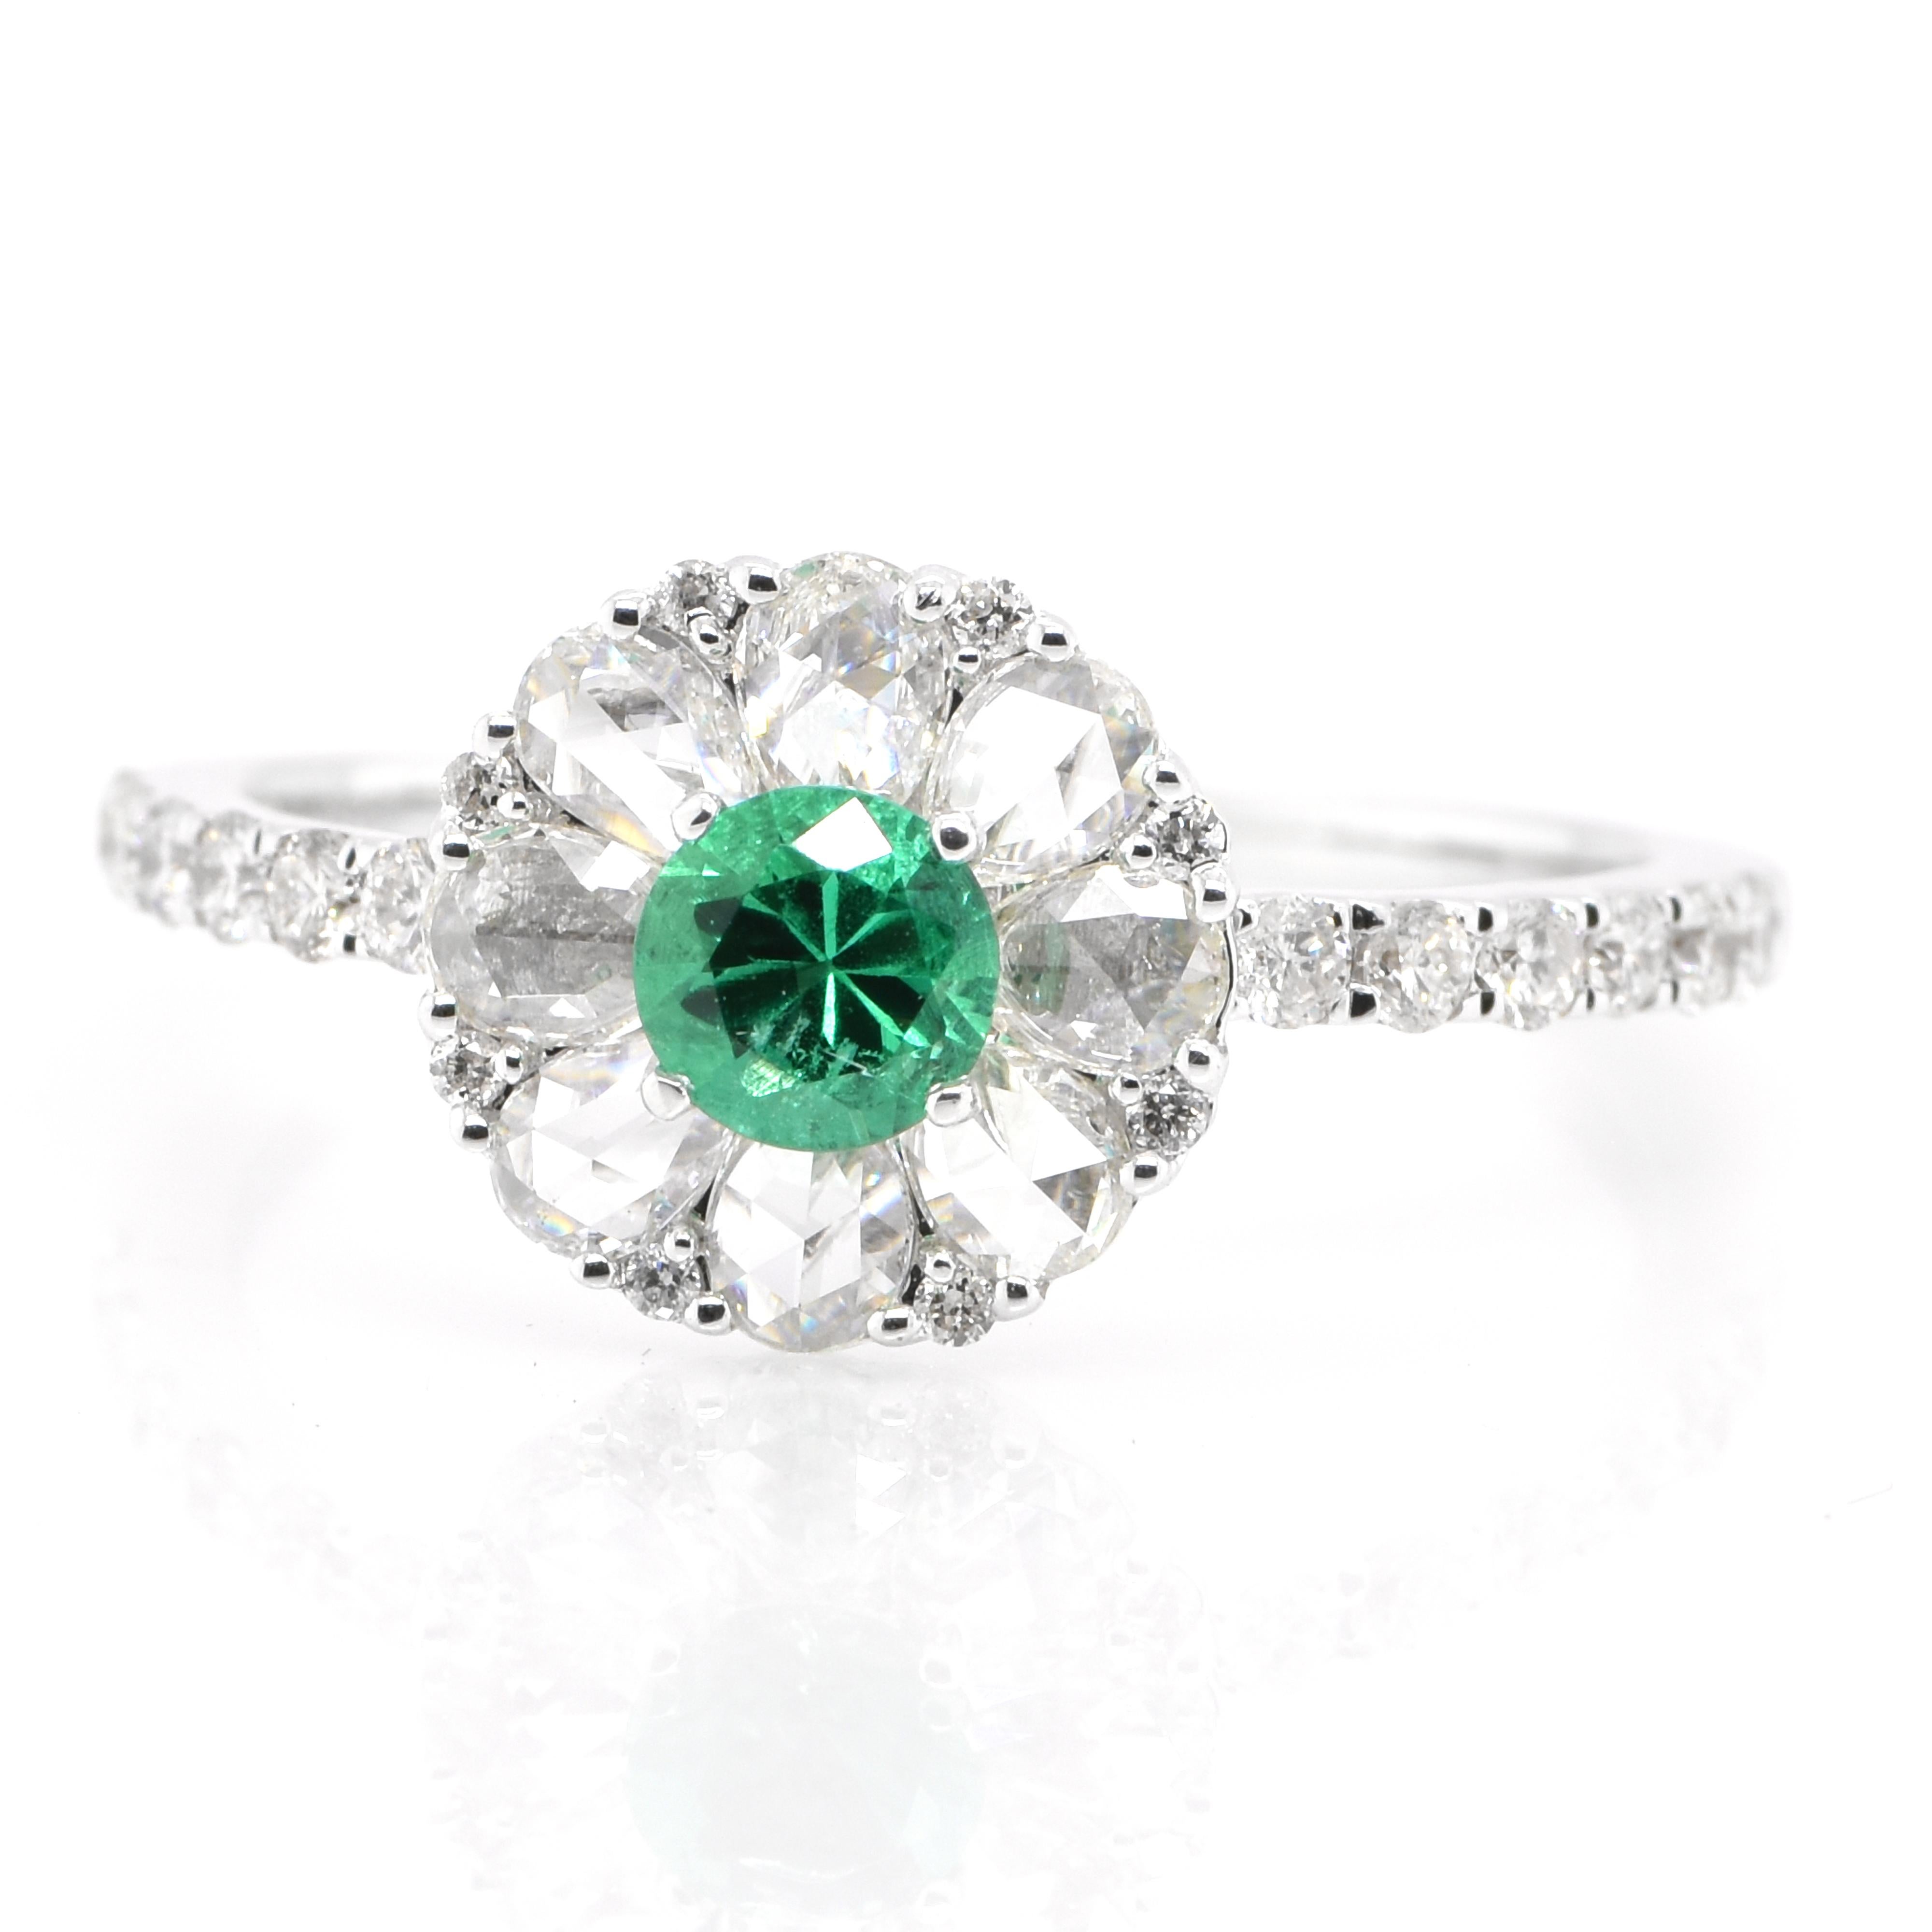 A stunning ring featuring a 0.26 Carat Natural Emerald and 0.80 Carats of Diamond Accents set in 18 Karat White Gold. People have admired emerald’s green for thousands of years. Emeralds have always been associated with the lushest landscapes and